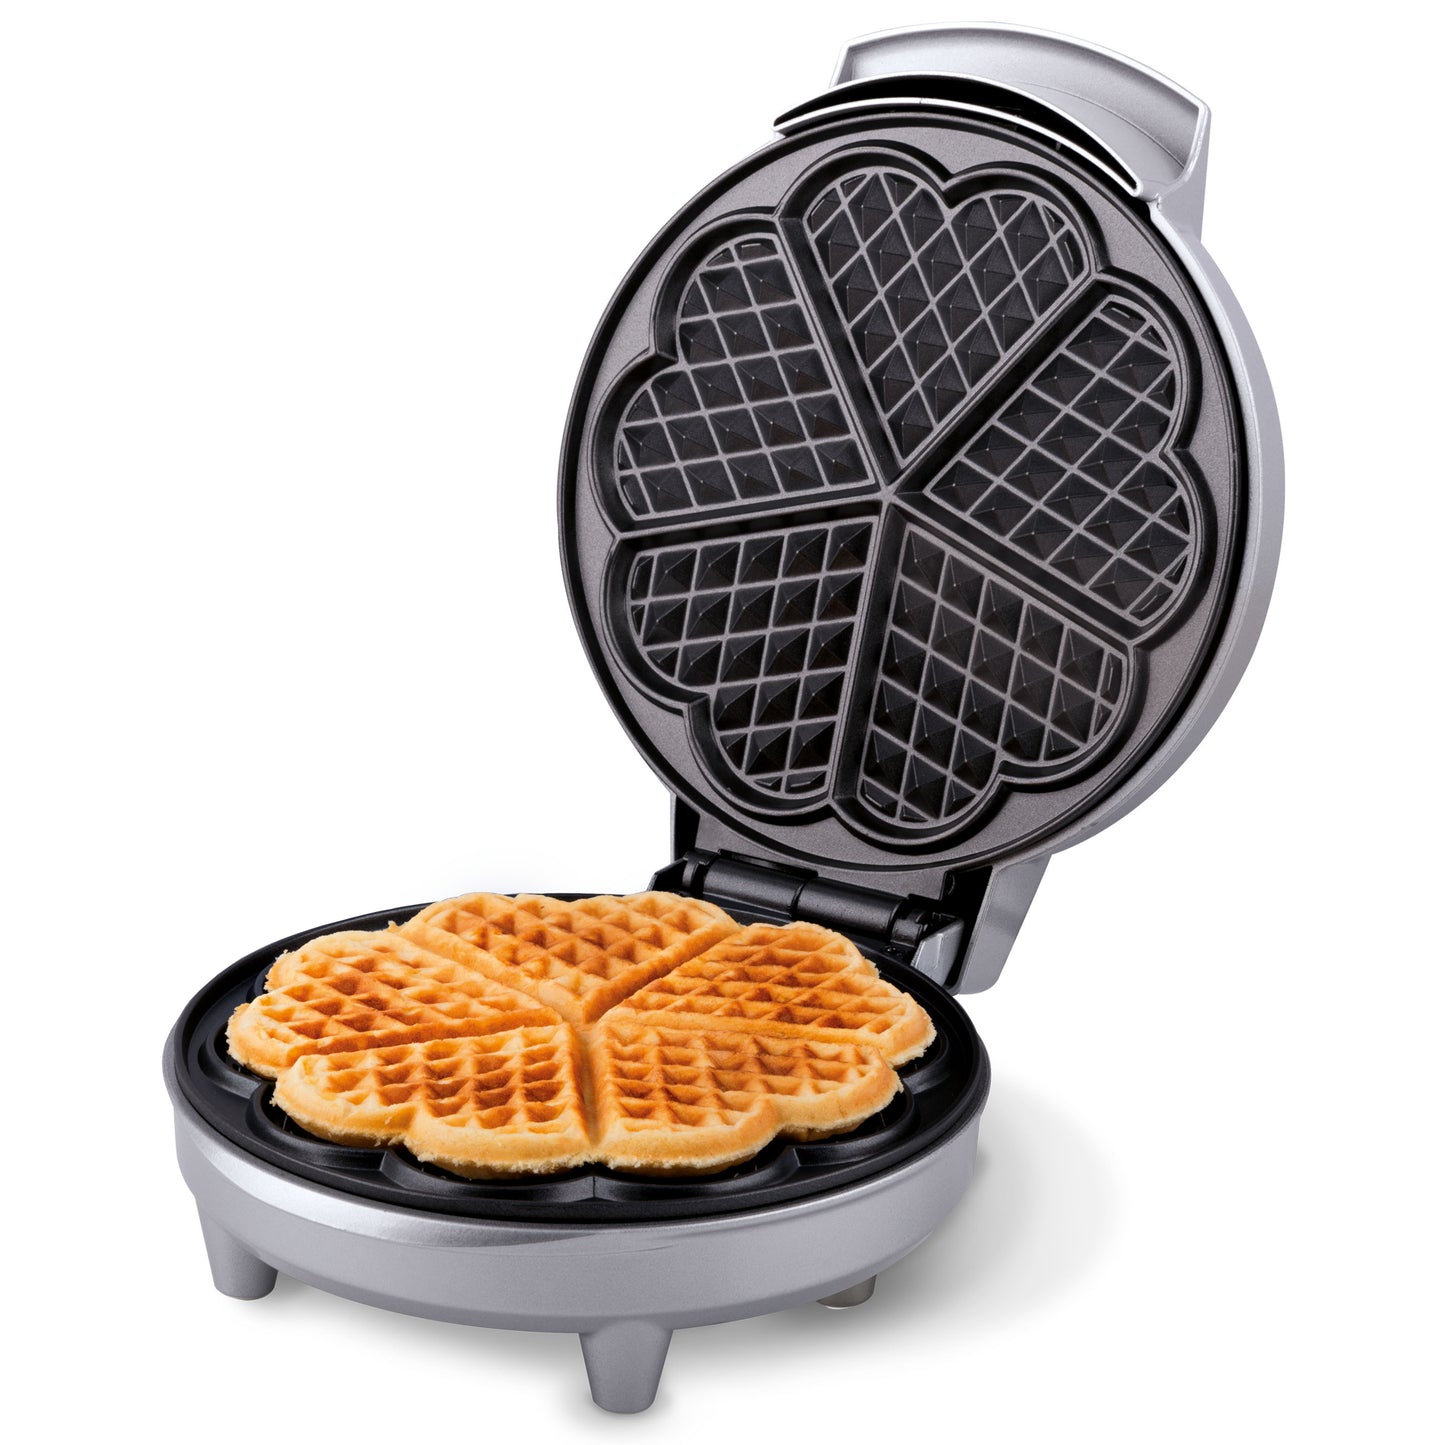 Trebs 99259 - Waffle Maker / Comfortbakery with indicator light and non-slip feet